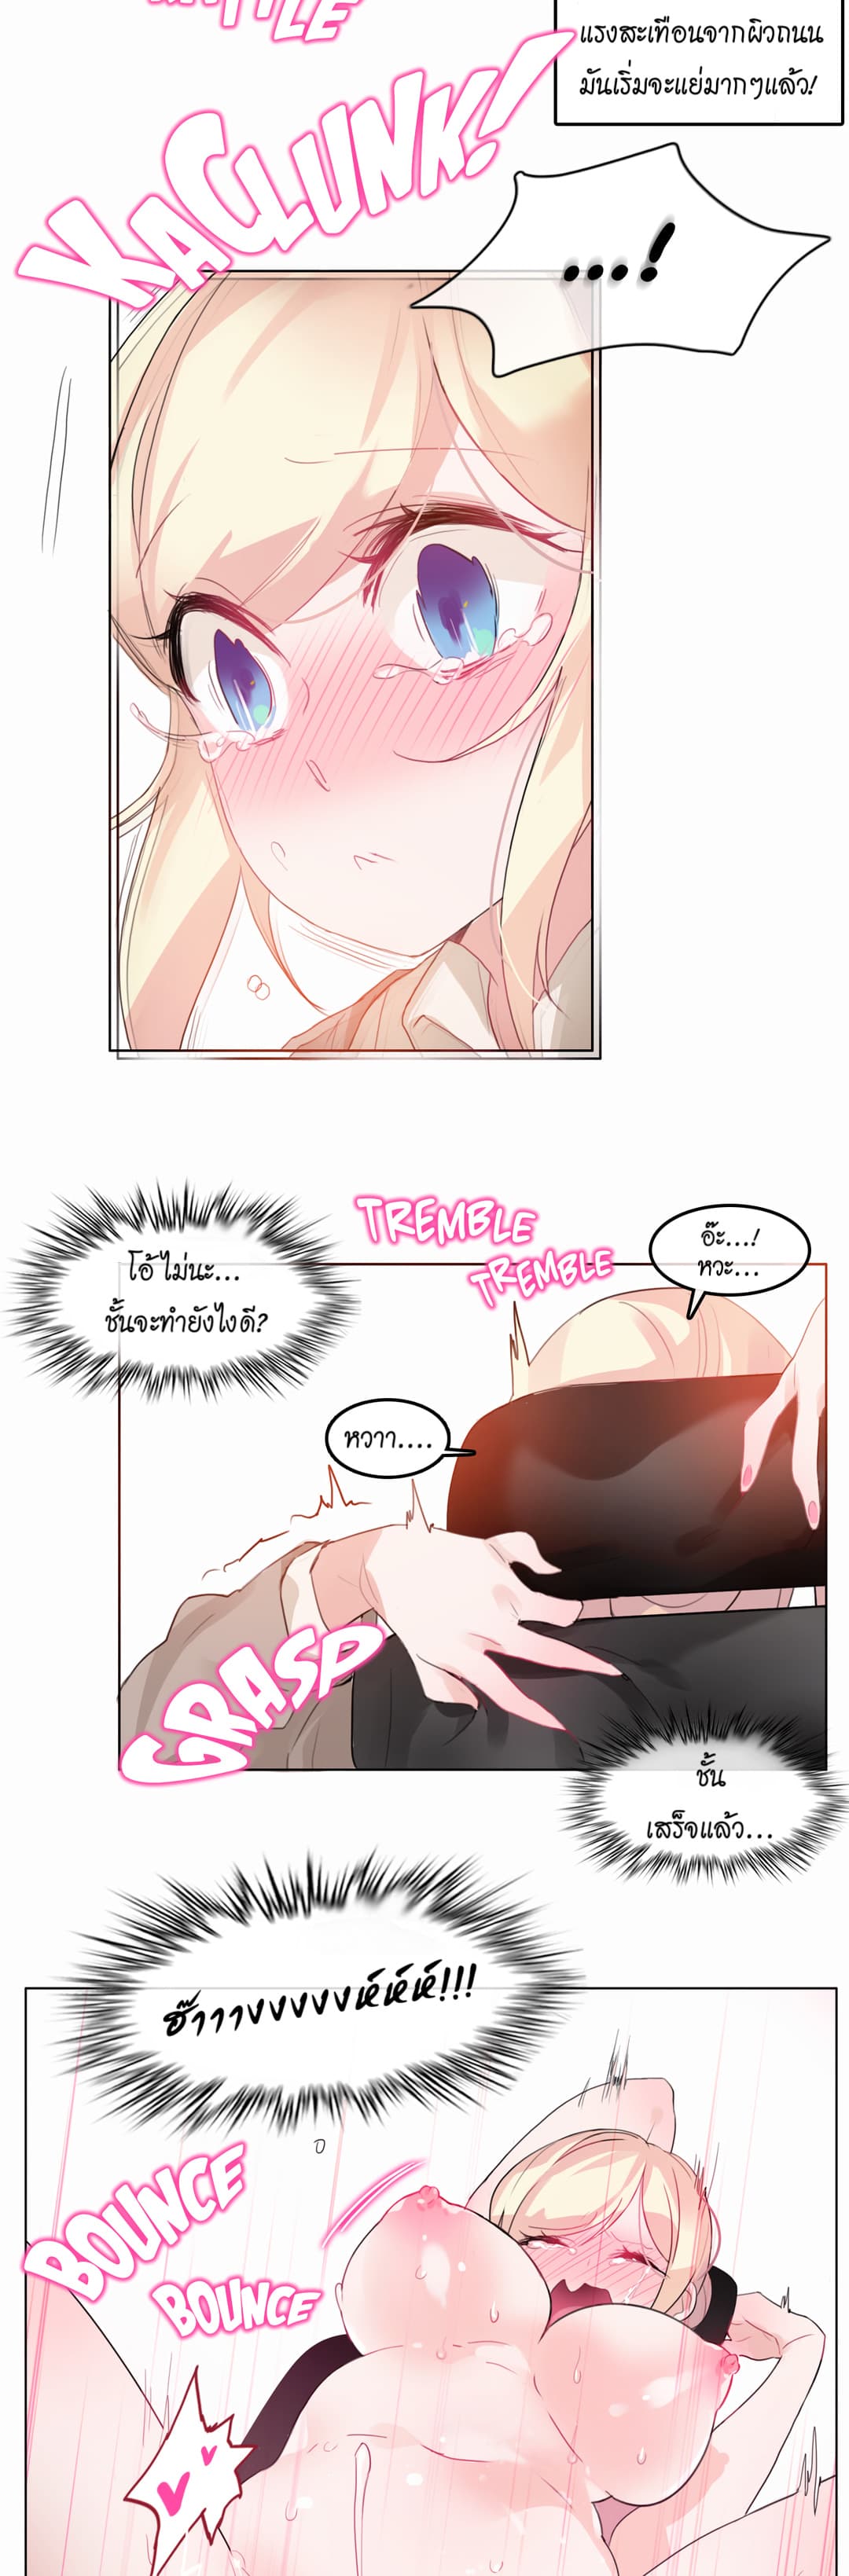 A Pervert’s Daily Life 19 (17)